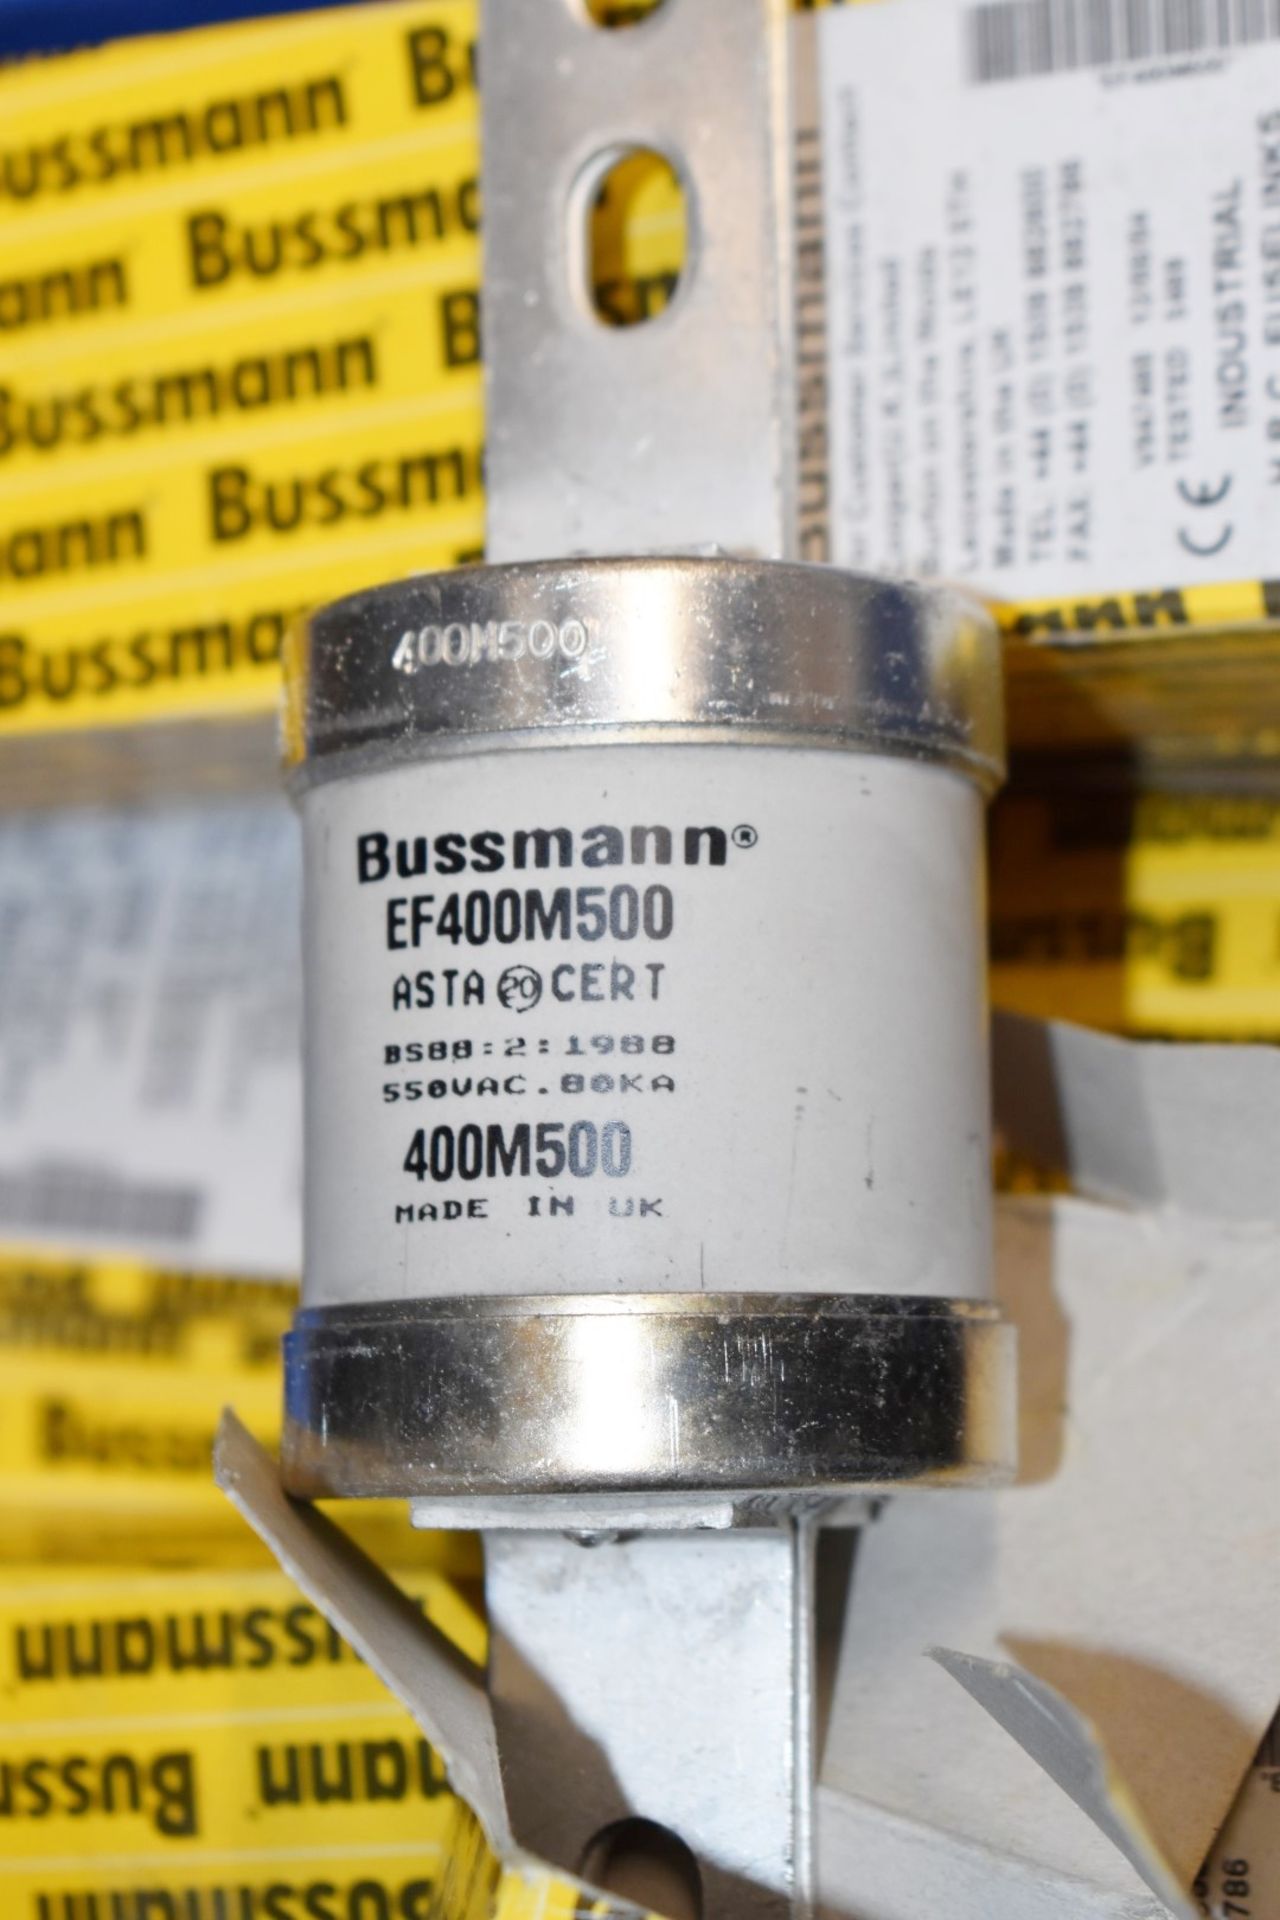 12 x Bussman 550v Industrial H.R.C Fuses - New Boxed Stock - Type EF400M500 - Image 2 of 3